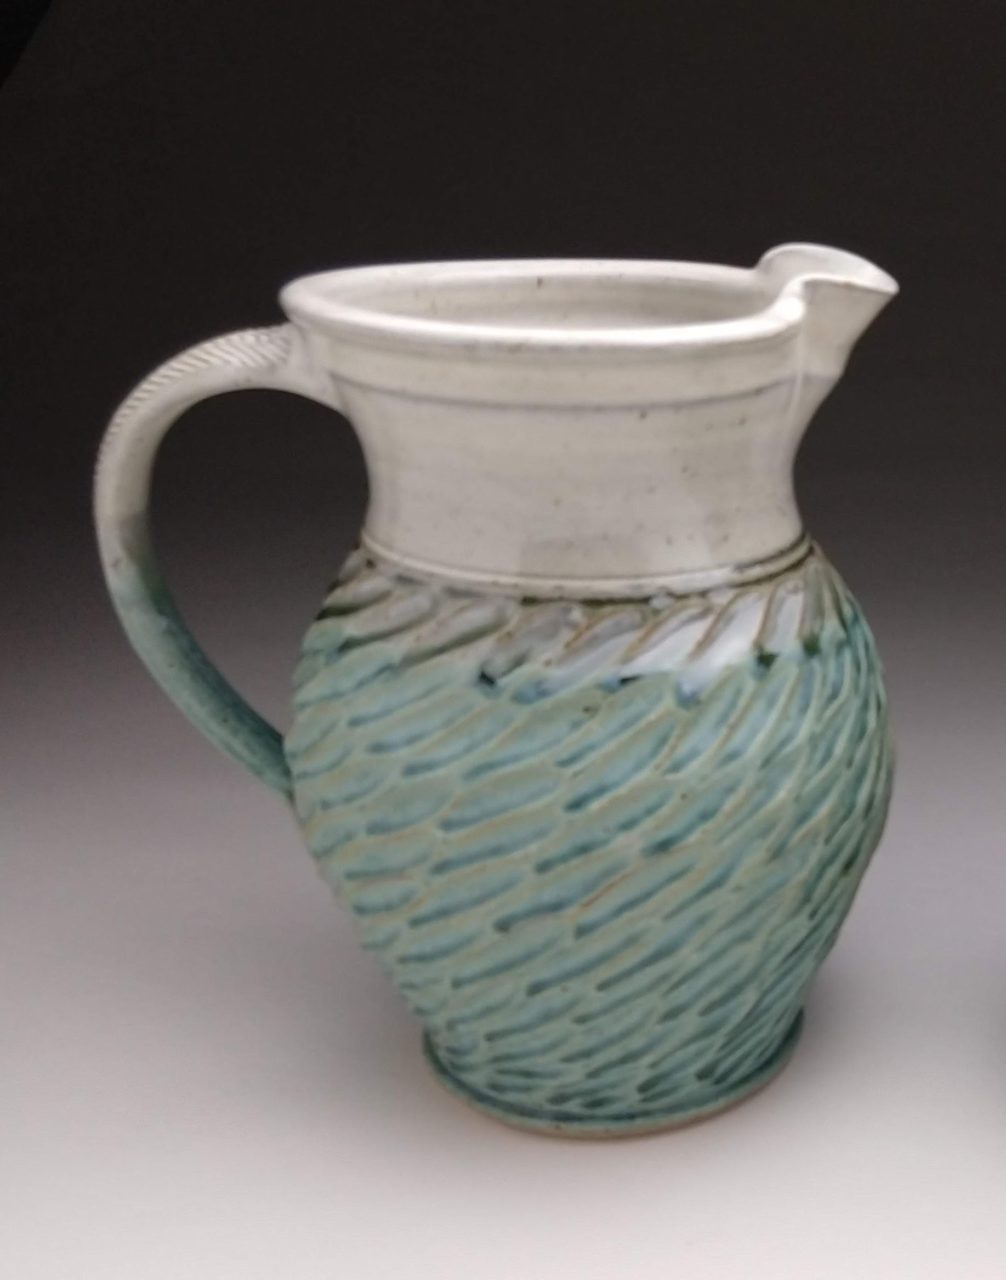 https://www.jeffbrownpottery.com/gypsy-cart/wp-content/uploads/2020/02/IMG_20190304_1906428194-scaled.jpg